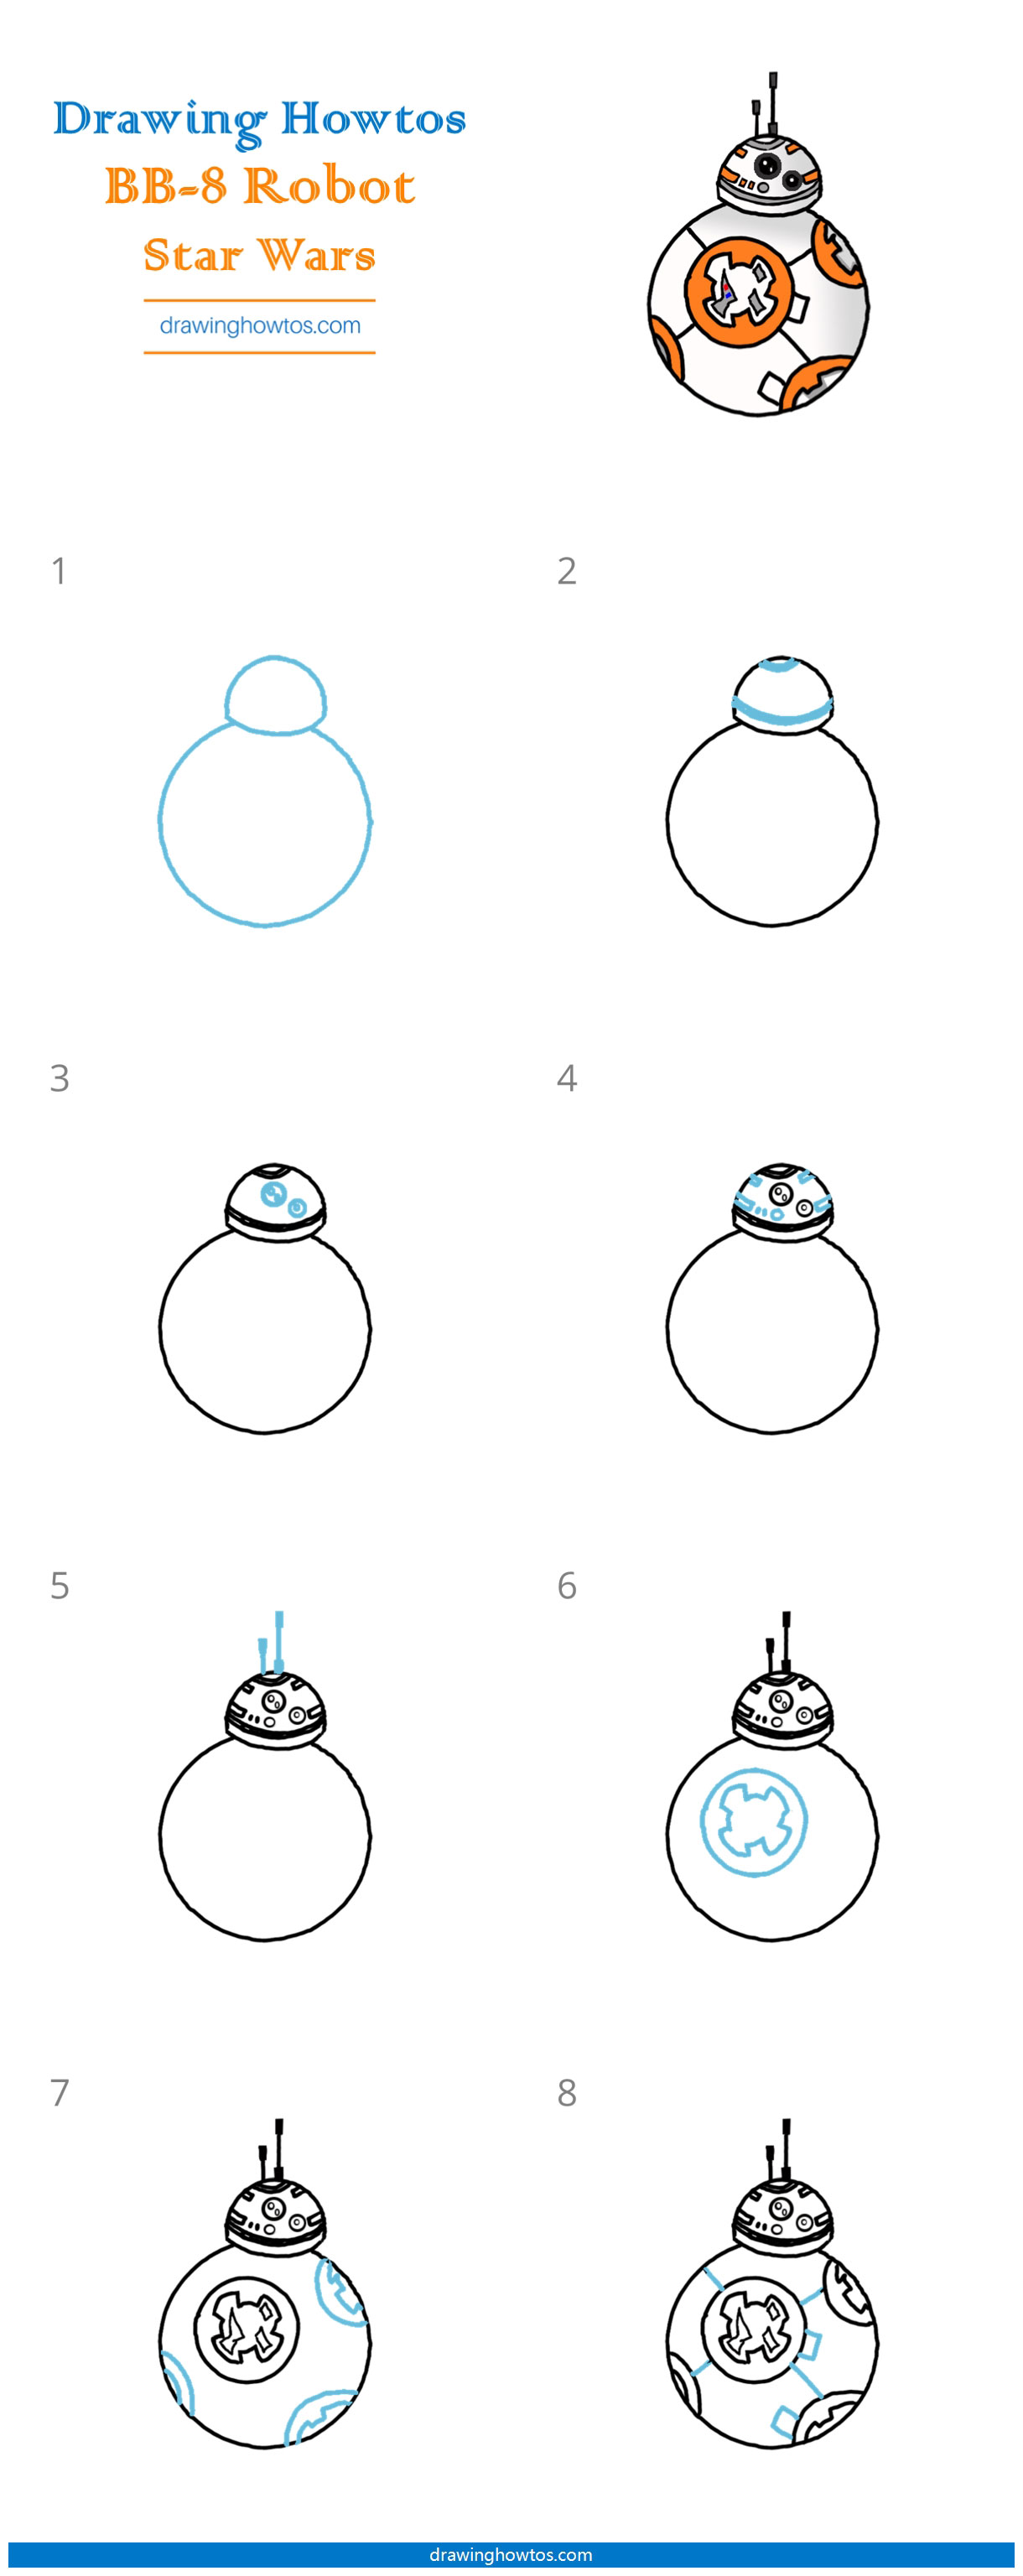 How to Draw a BB-8 from Star Wars Step by Step